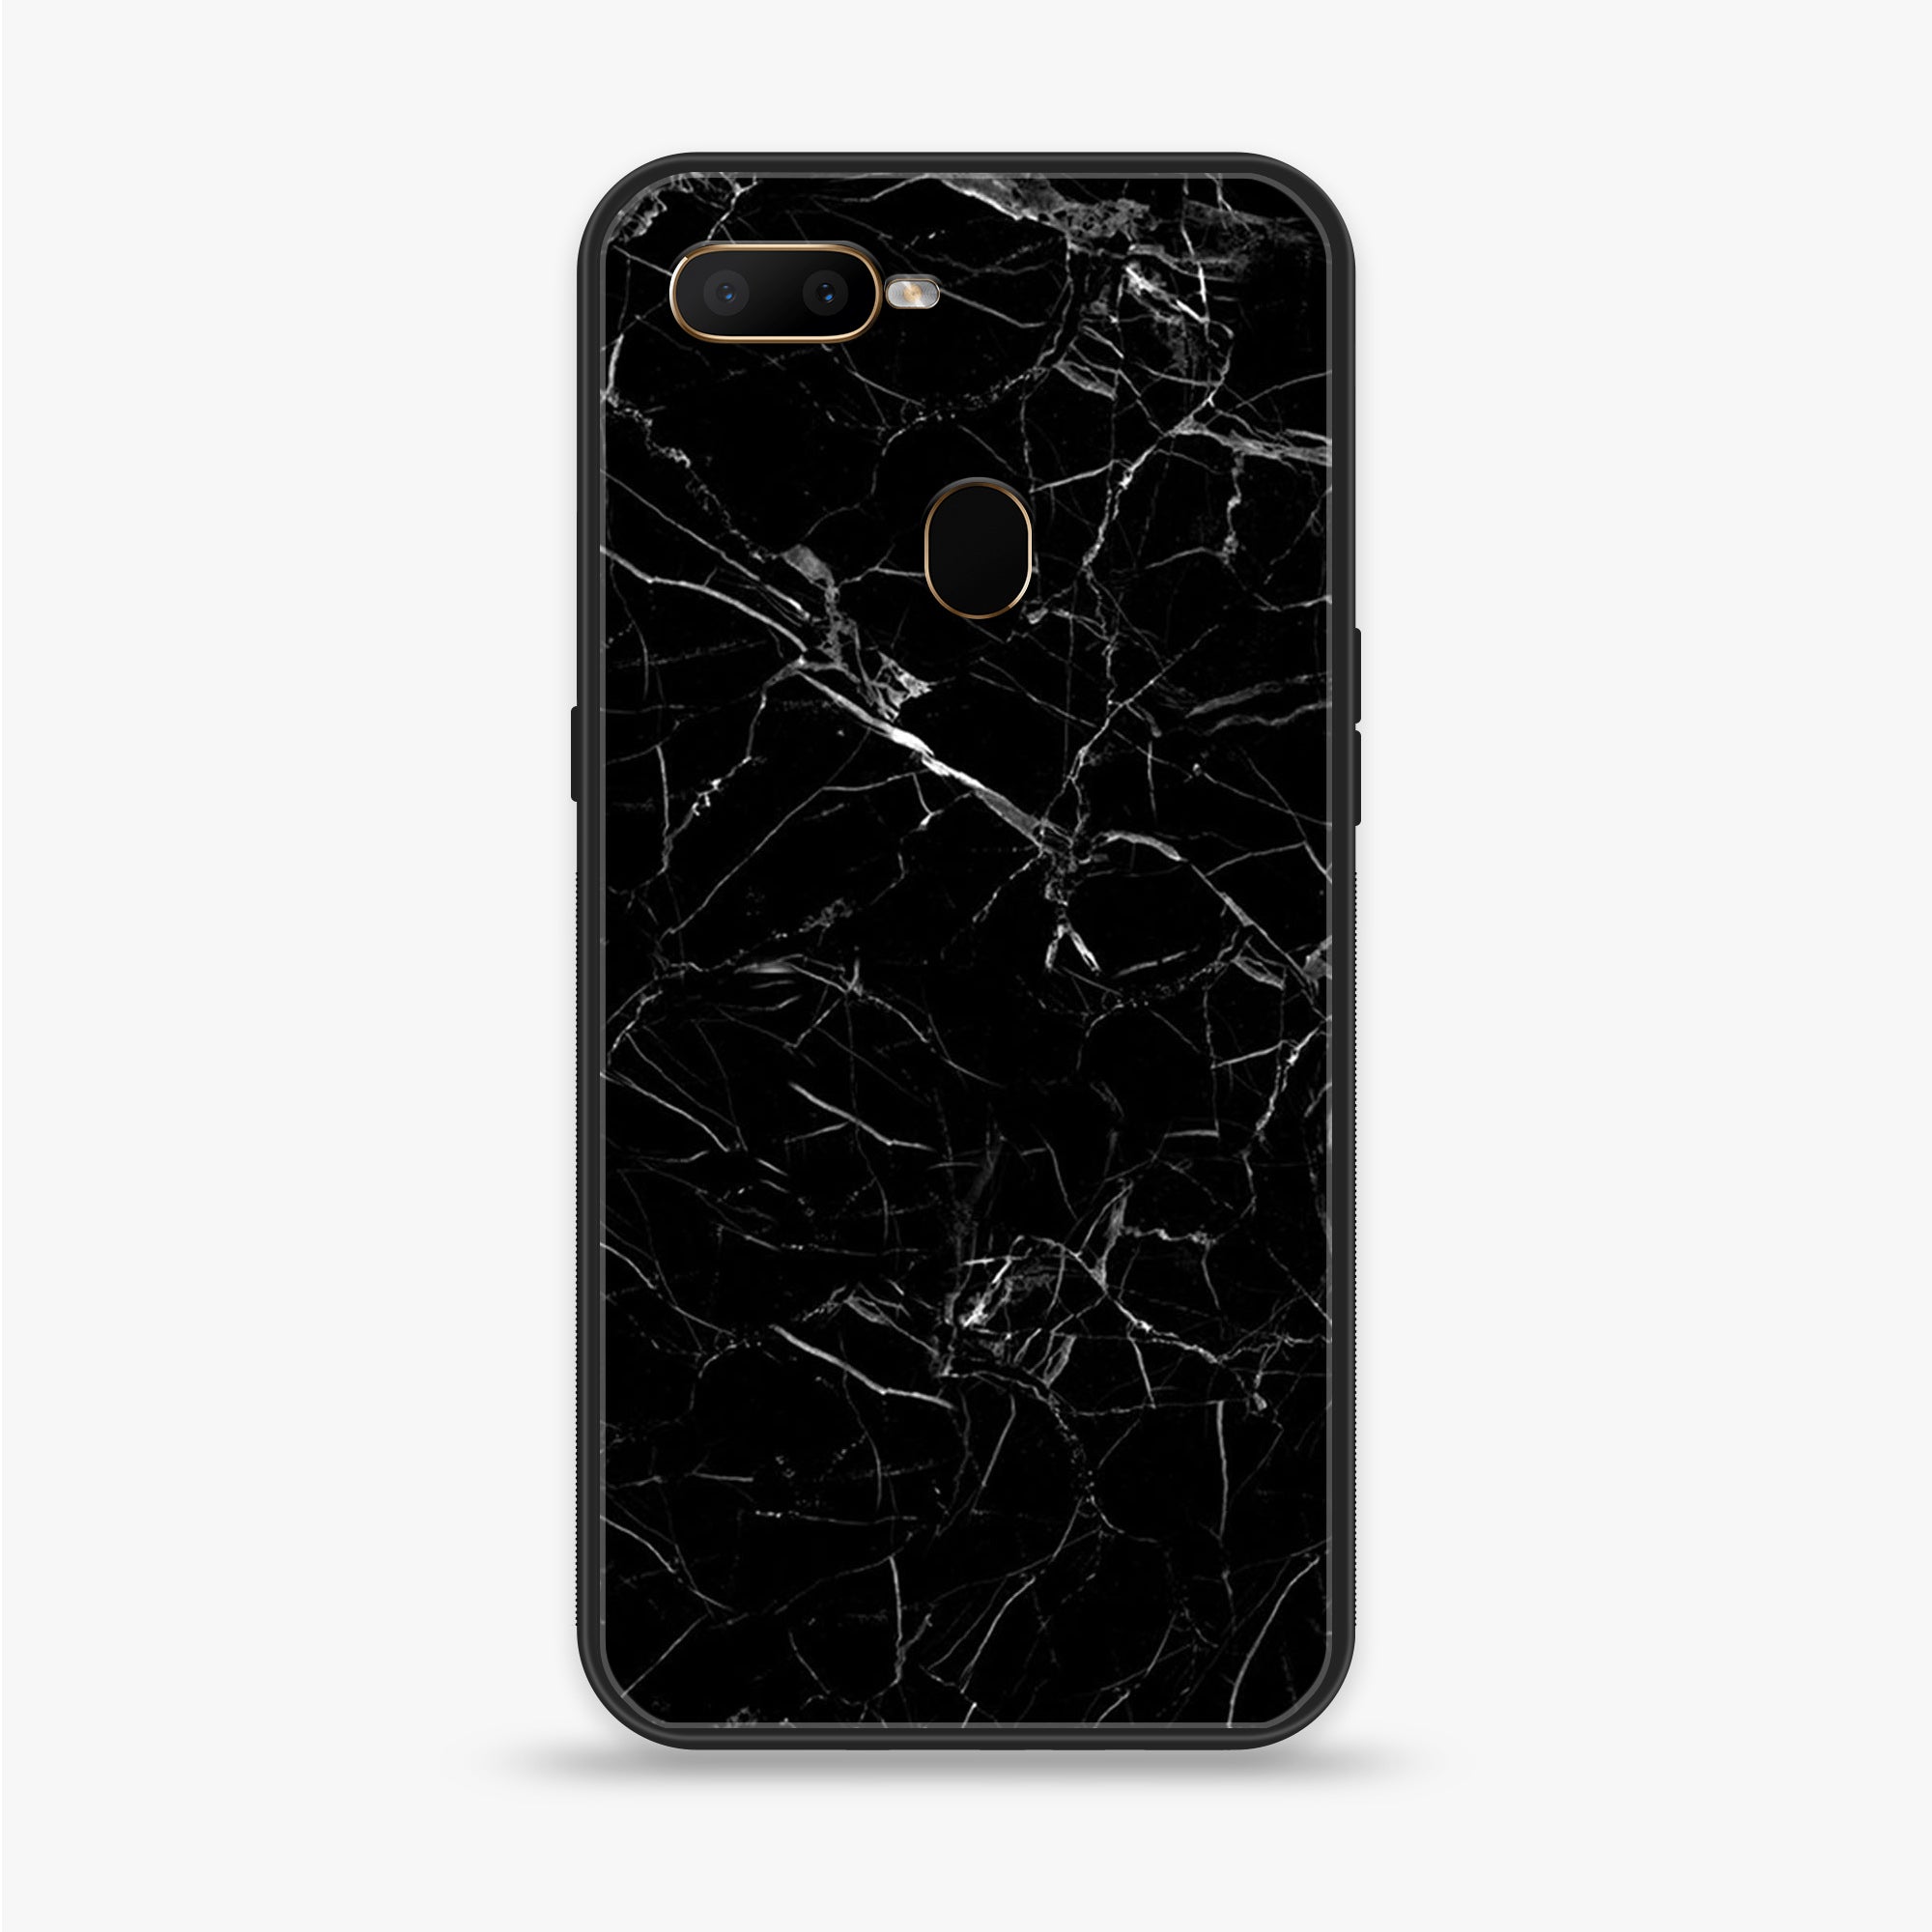 OPPO A5s - Black Marble Series - Premium Printed Glass soft Bumper shock Proof Case